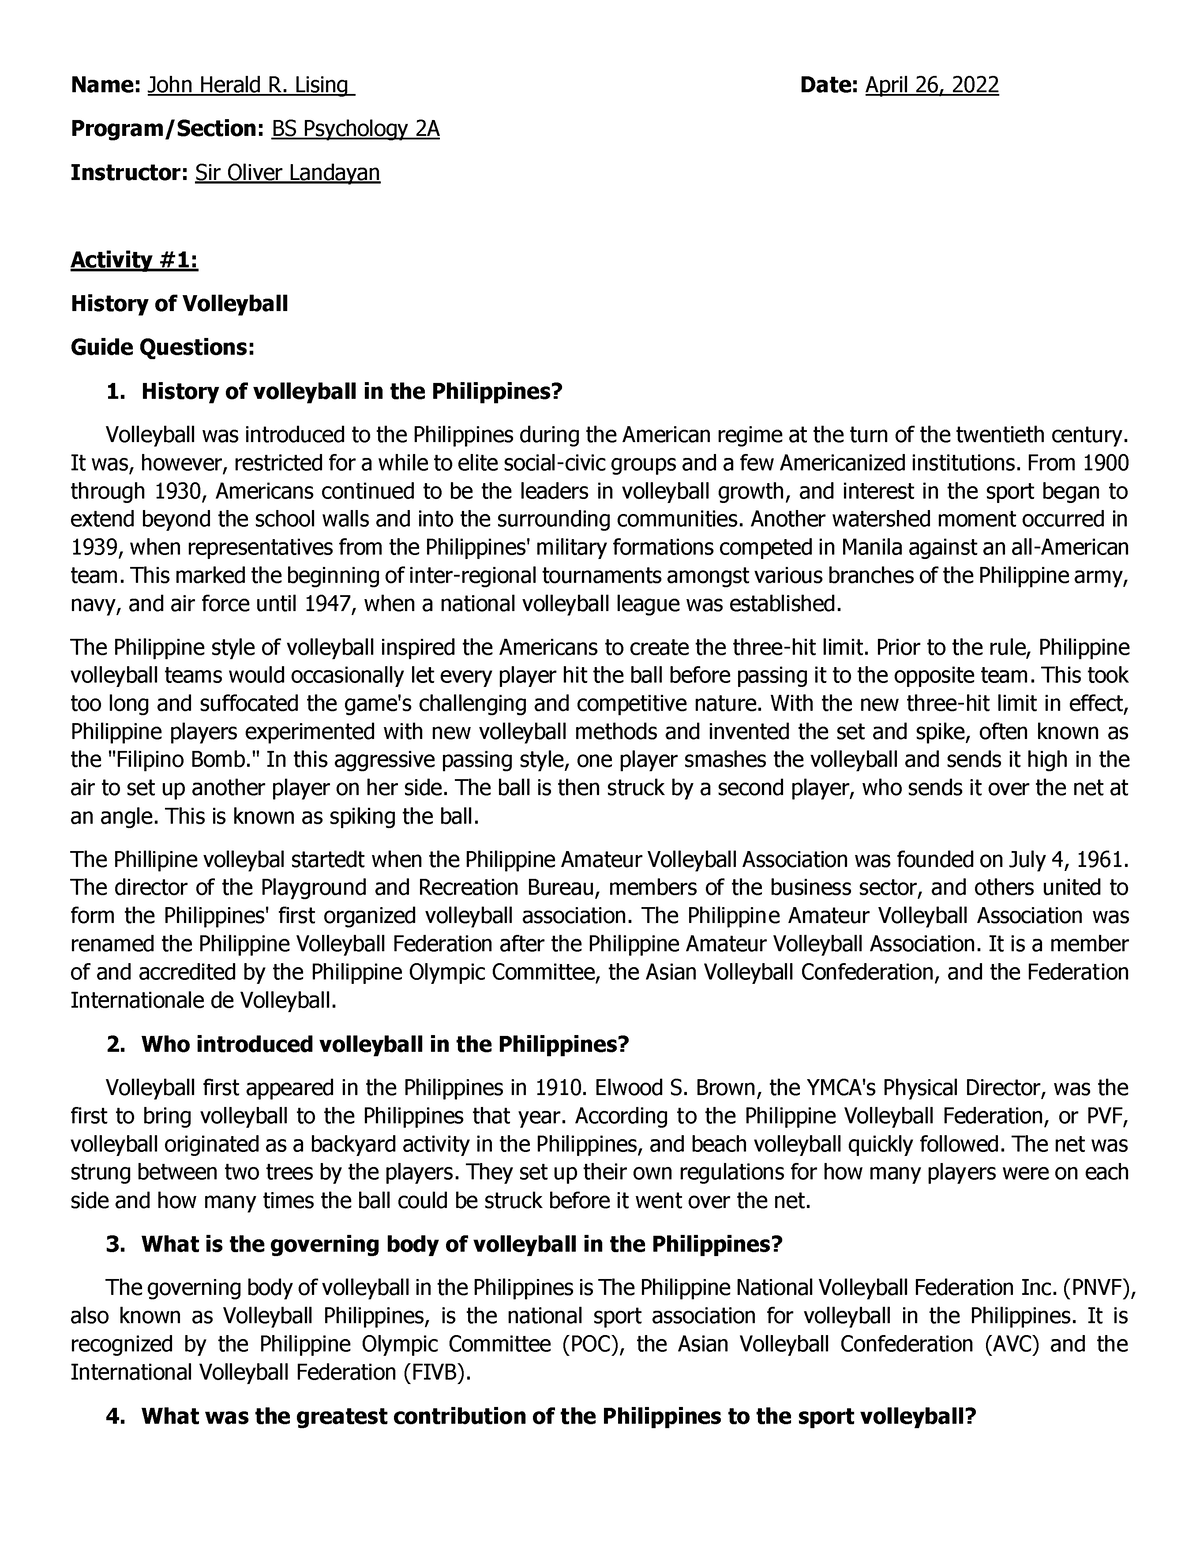 history of volleyball in the philippines essay